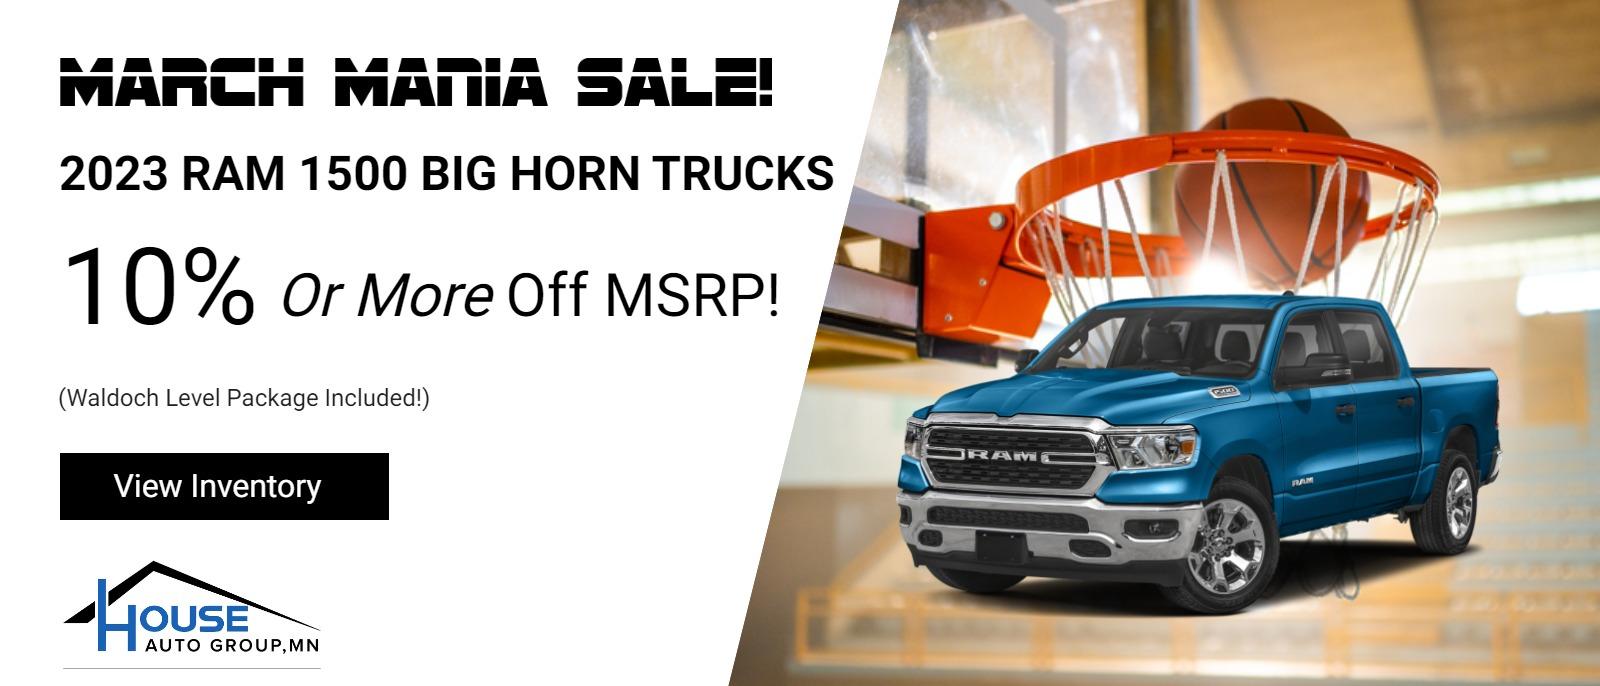 2023 Ram 1500 Big Horn Trucks -- 10% Or More Off MSRP - Waldoch Level Package Included!